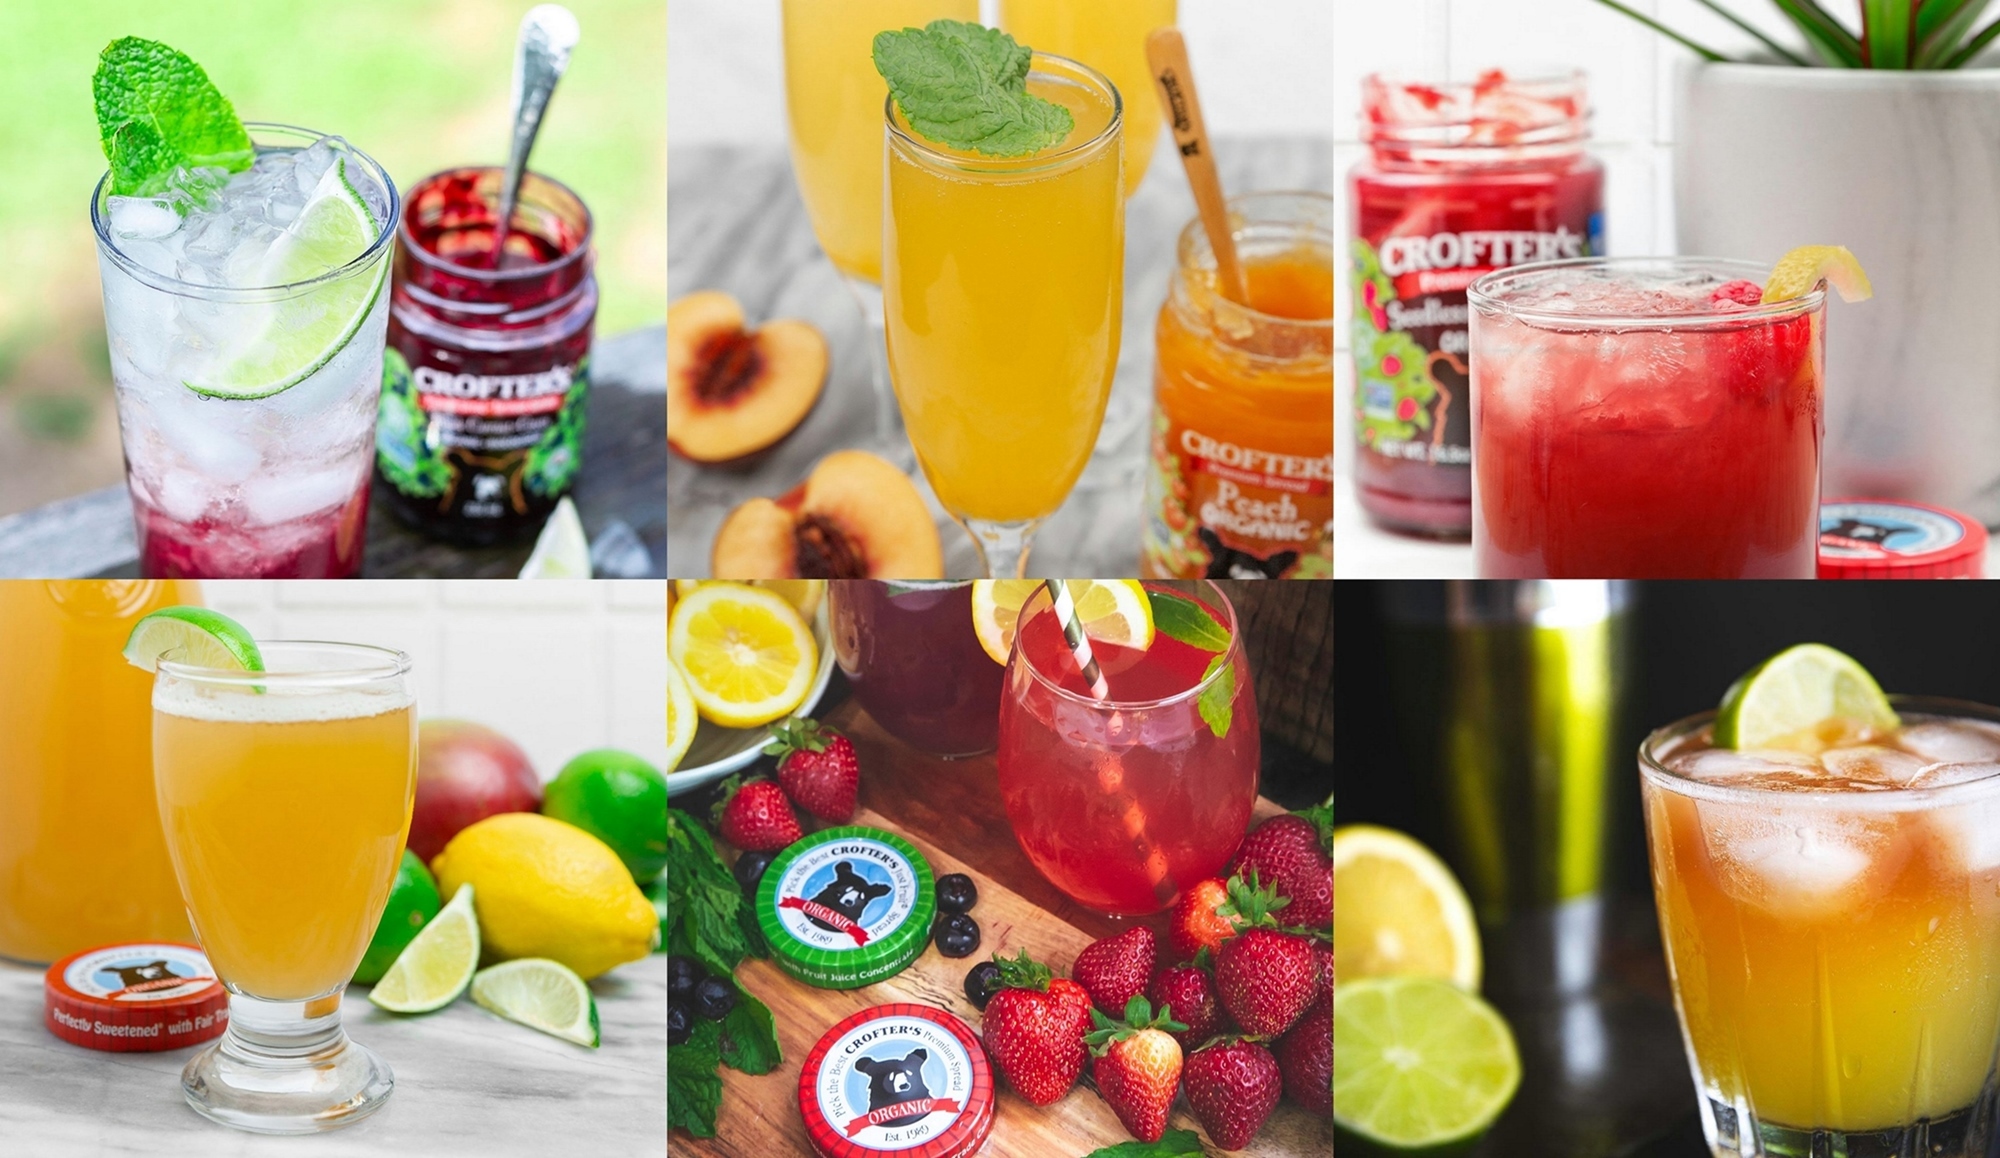 Jam Cocktails: Spring Libations with Crofter's Organic Fruit Spreads